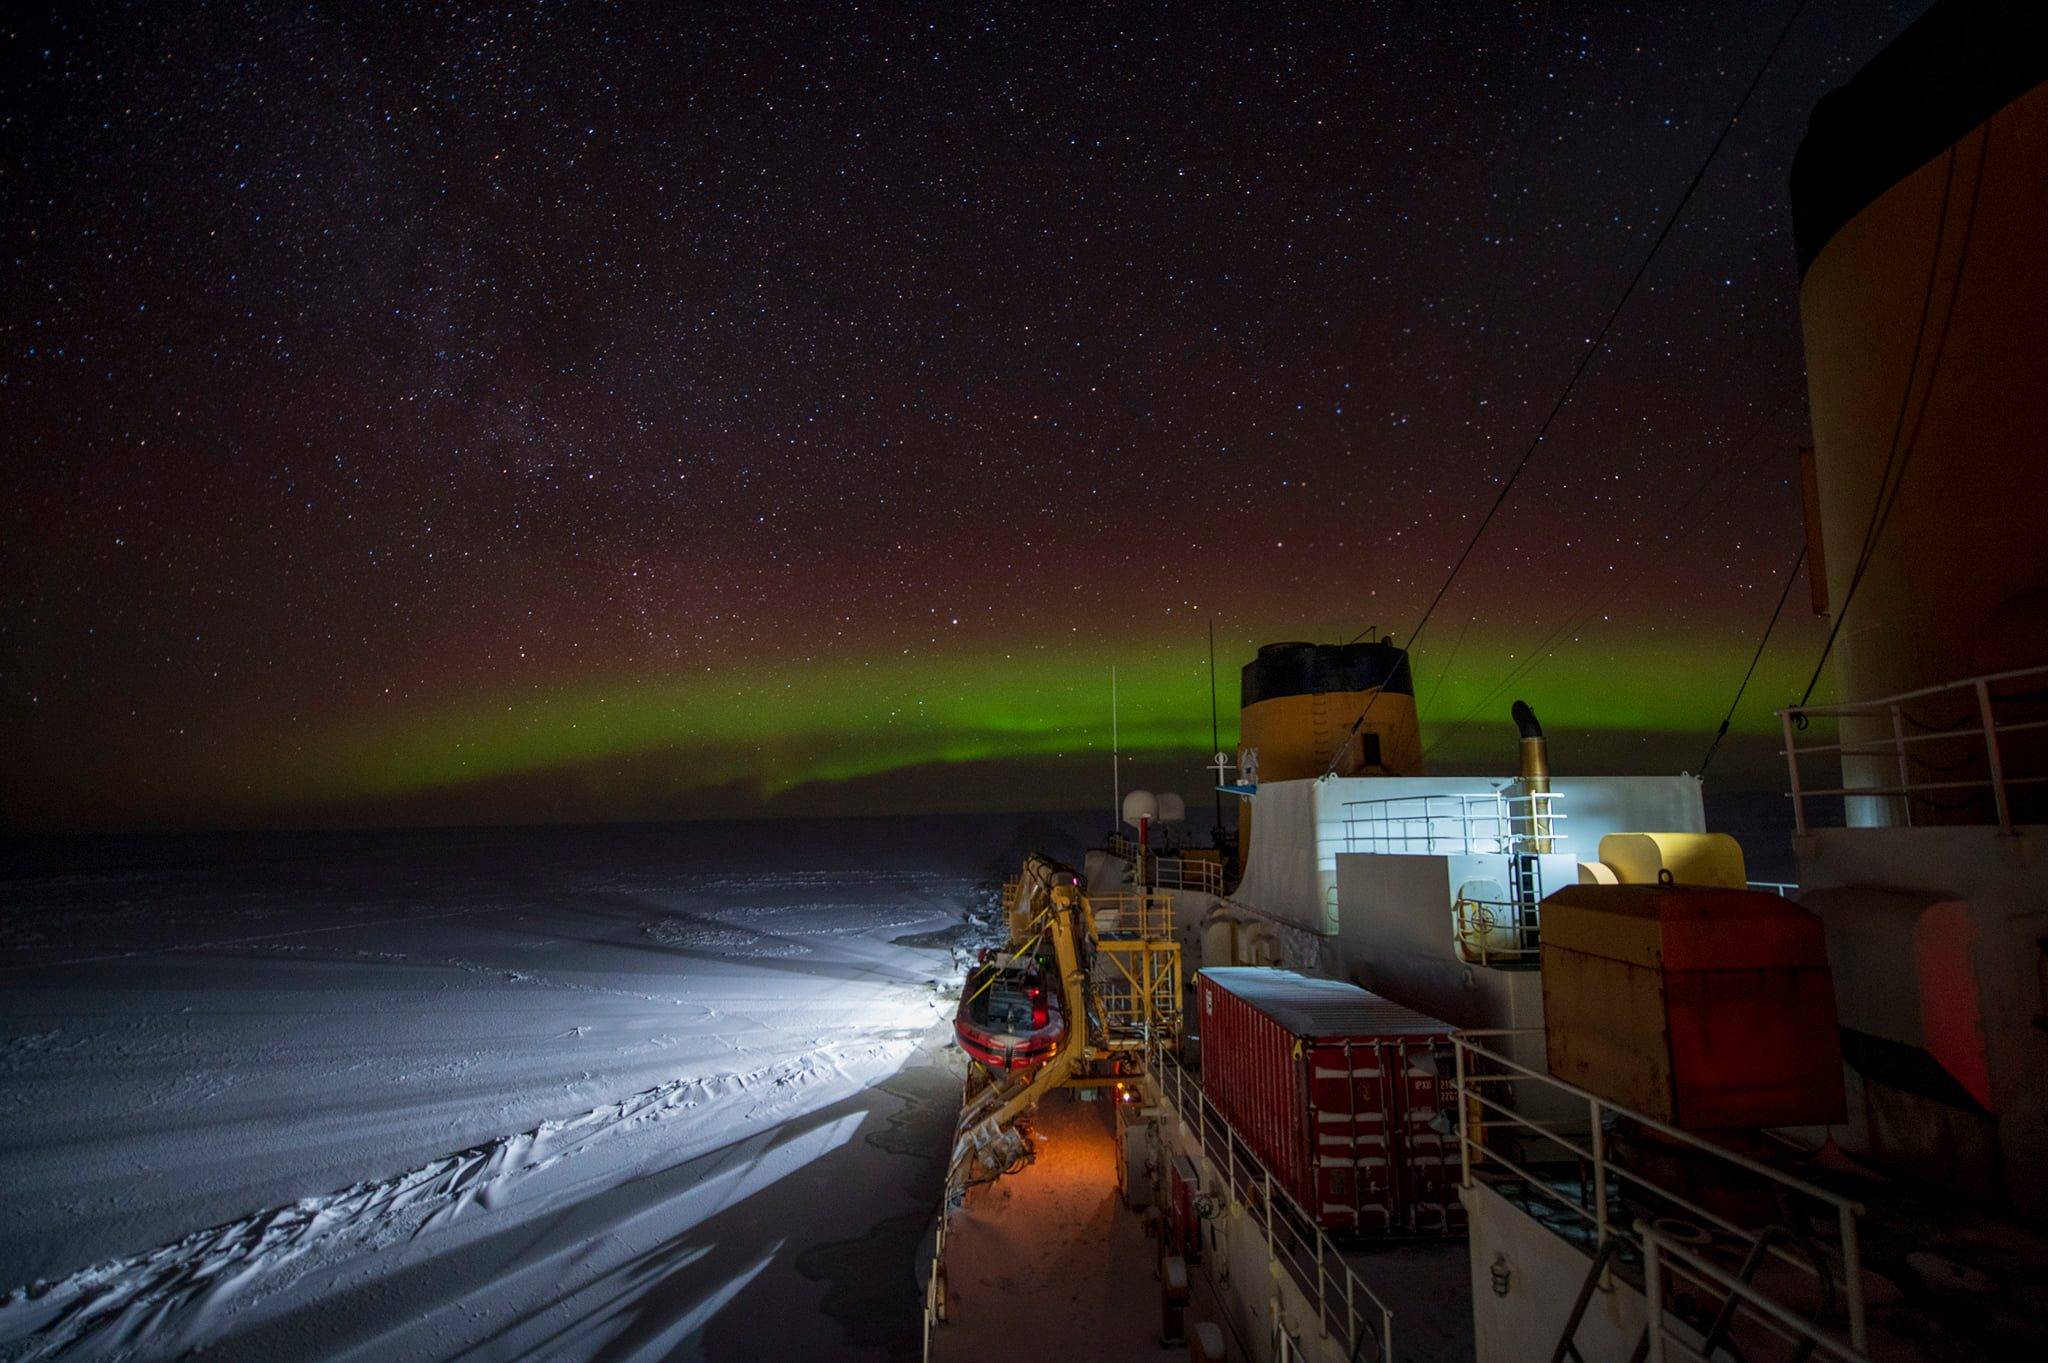 Coast Guard Cutter Polar Star steams under the aurora borealis during its current Arctic deployment patrolling the maritime boundary with Russia. (U.S. Coast Guard Photo / Petty Officer 1st Class Cynthia Oldham)